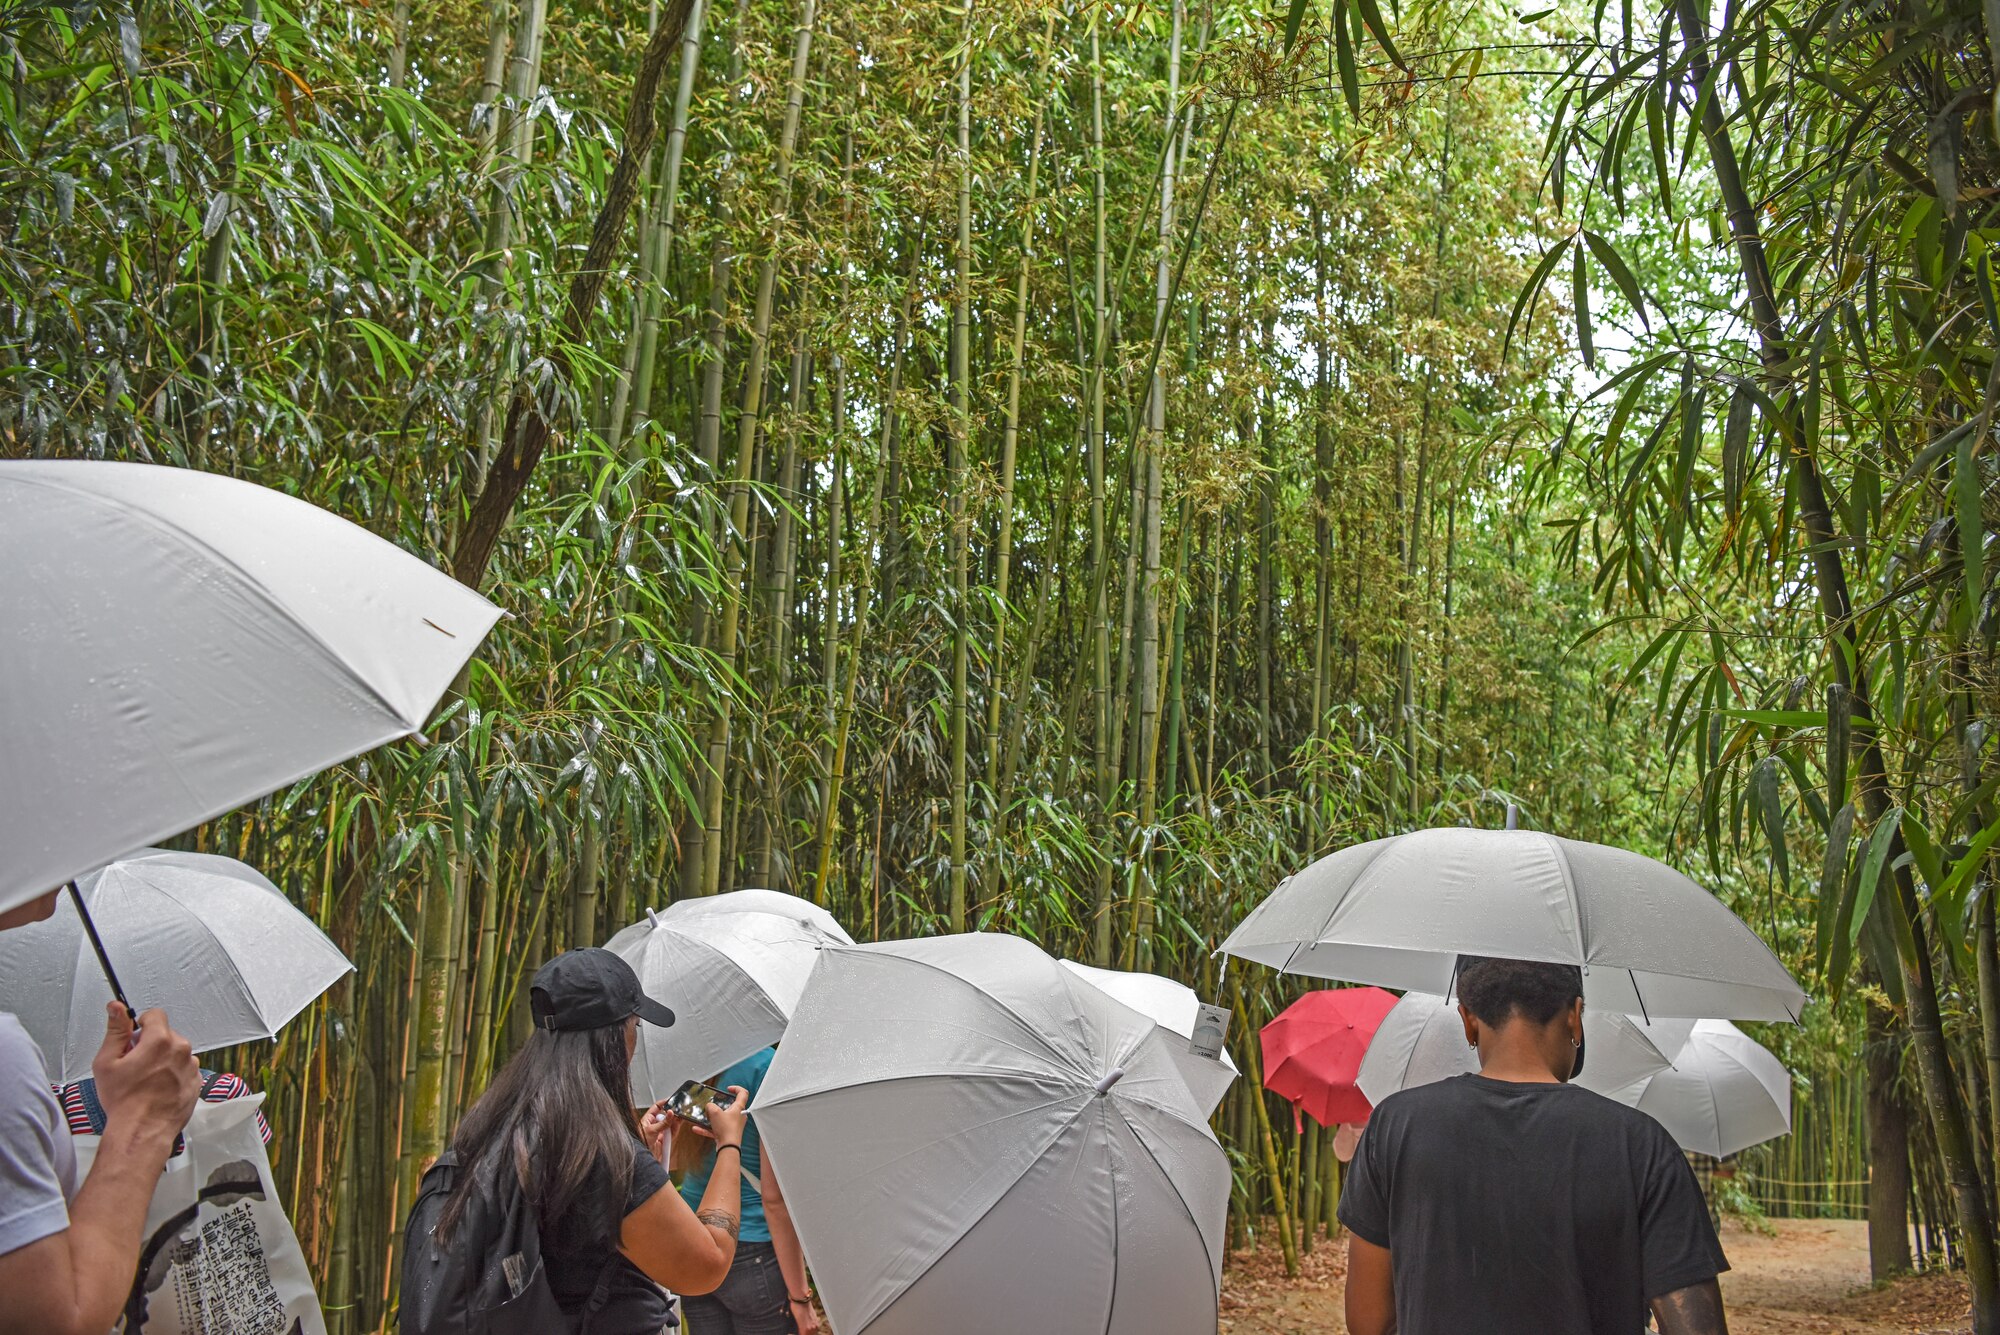 U.S. service members stationed around the Korean Peninsula explore Juknokwon bamboo forest during a Ministry of National Defense tour at Damyang, Republic of Korea, July 10, 2019. Service members also had the opportunity to make a traditional Korean bamboo fan with Juknokwon’s bamboo fan masters. (U.S. Air Force photo by Staff Sgt. Mackenzie Mendez)